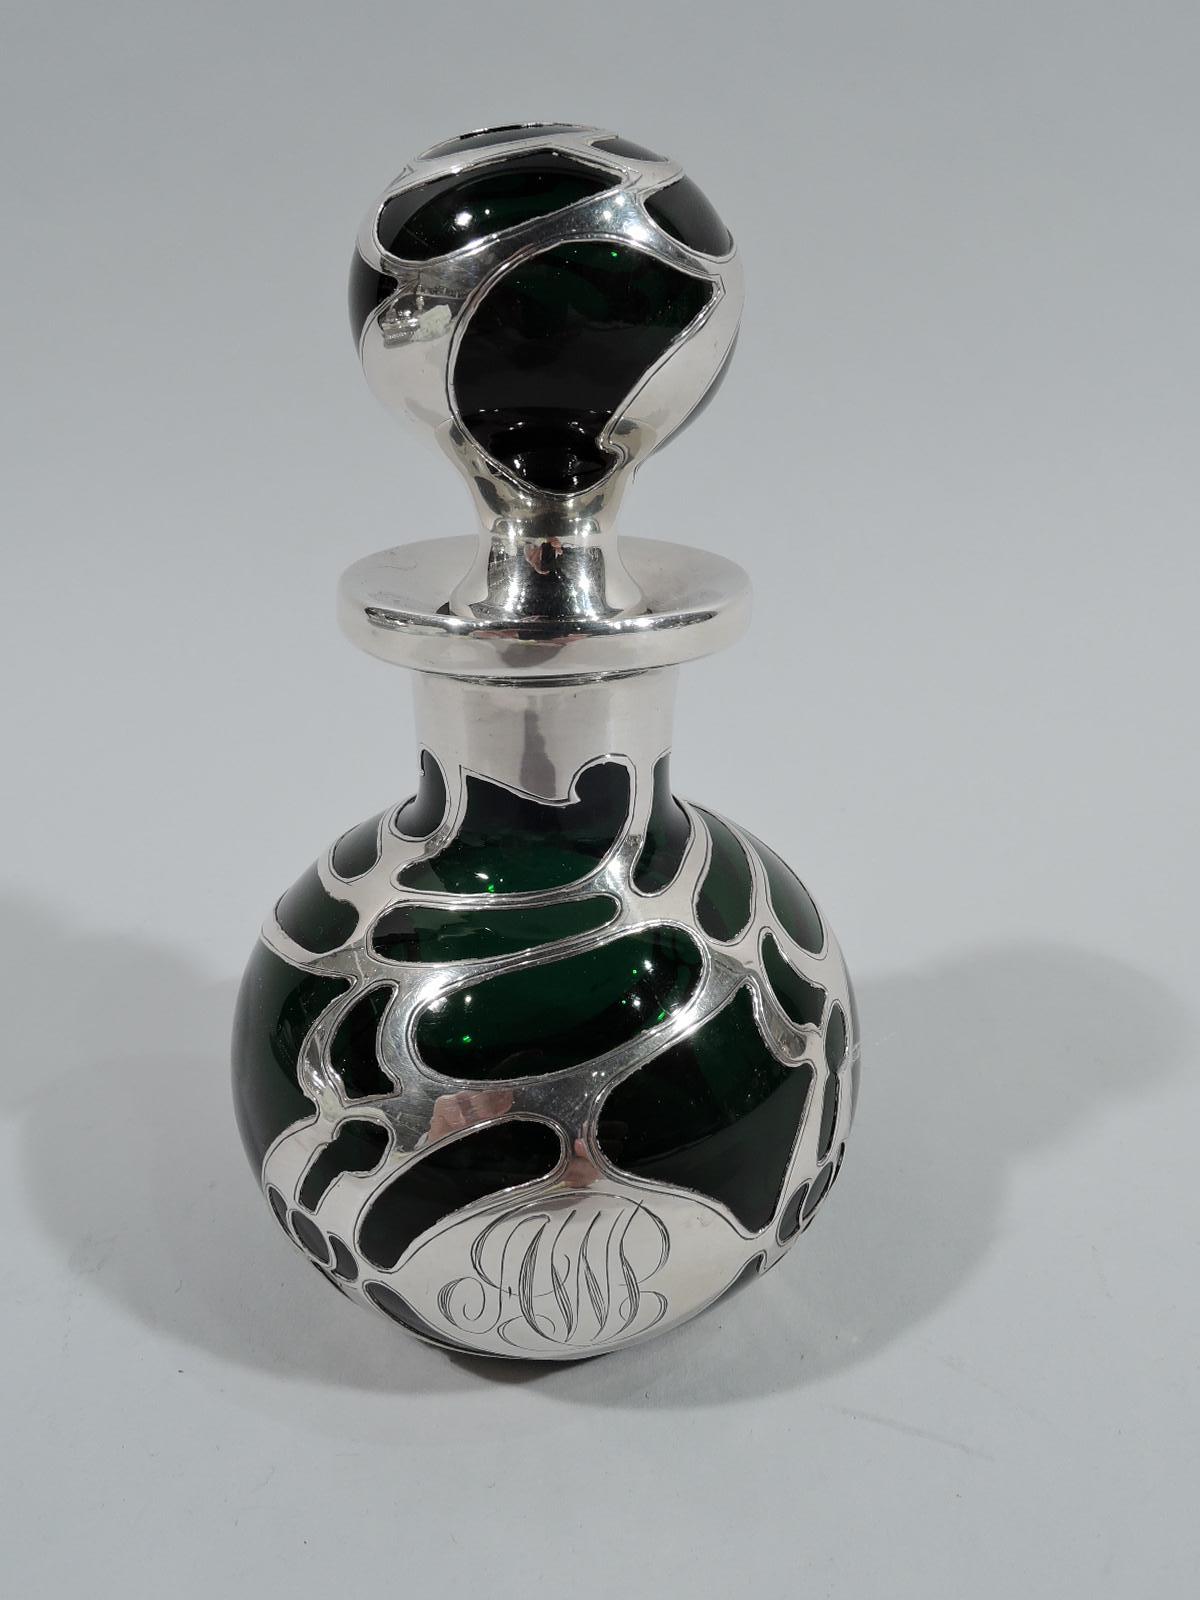 Turn-of-the-century Art Nouveau perfume with silver overlay. Globular bottle with short straight neck and everted rim in silver collar. Ball stopper. Overlay in biomorphic form with open irregular shapes. Engraved interlaced script monogram. Glass